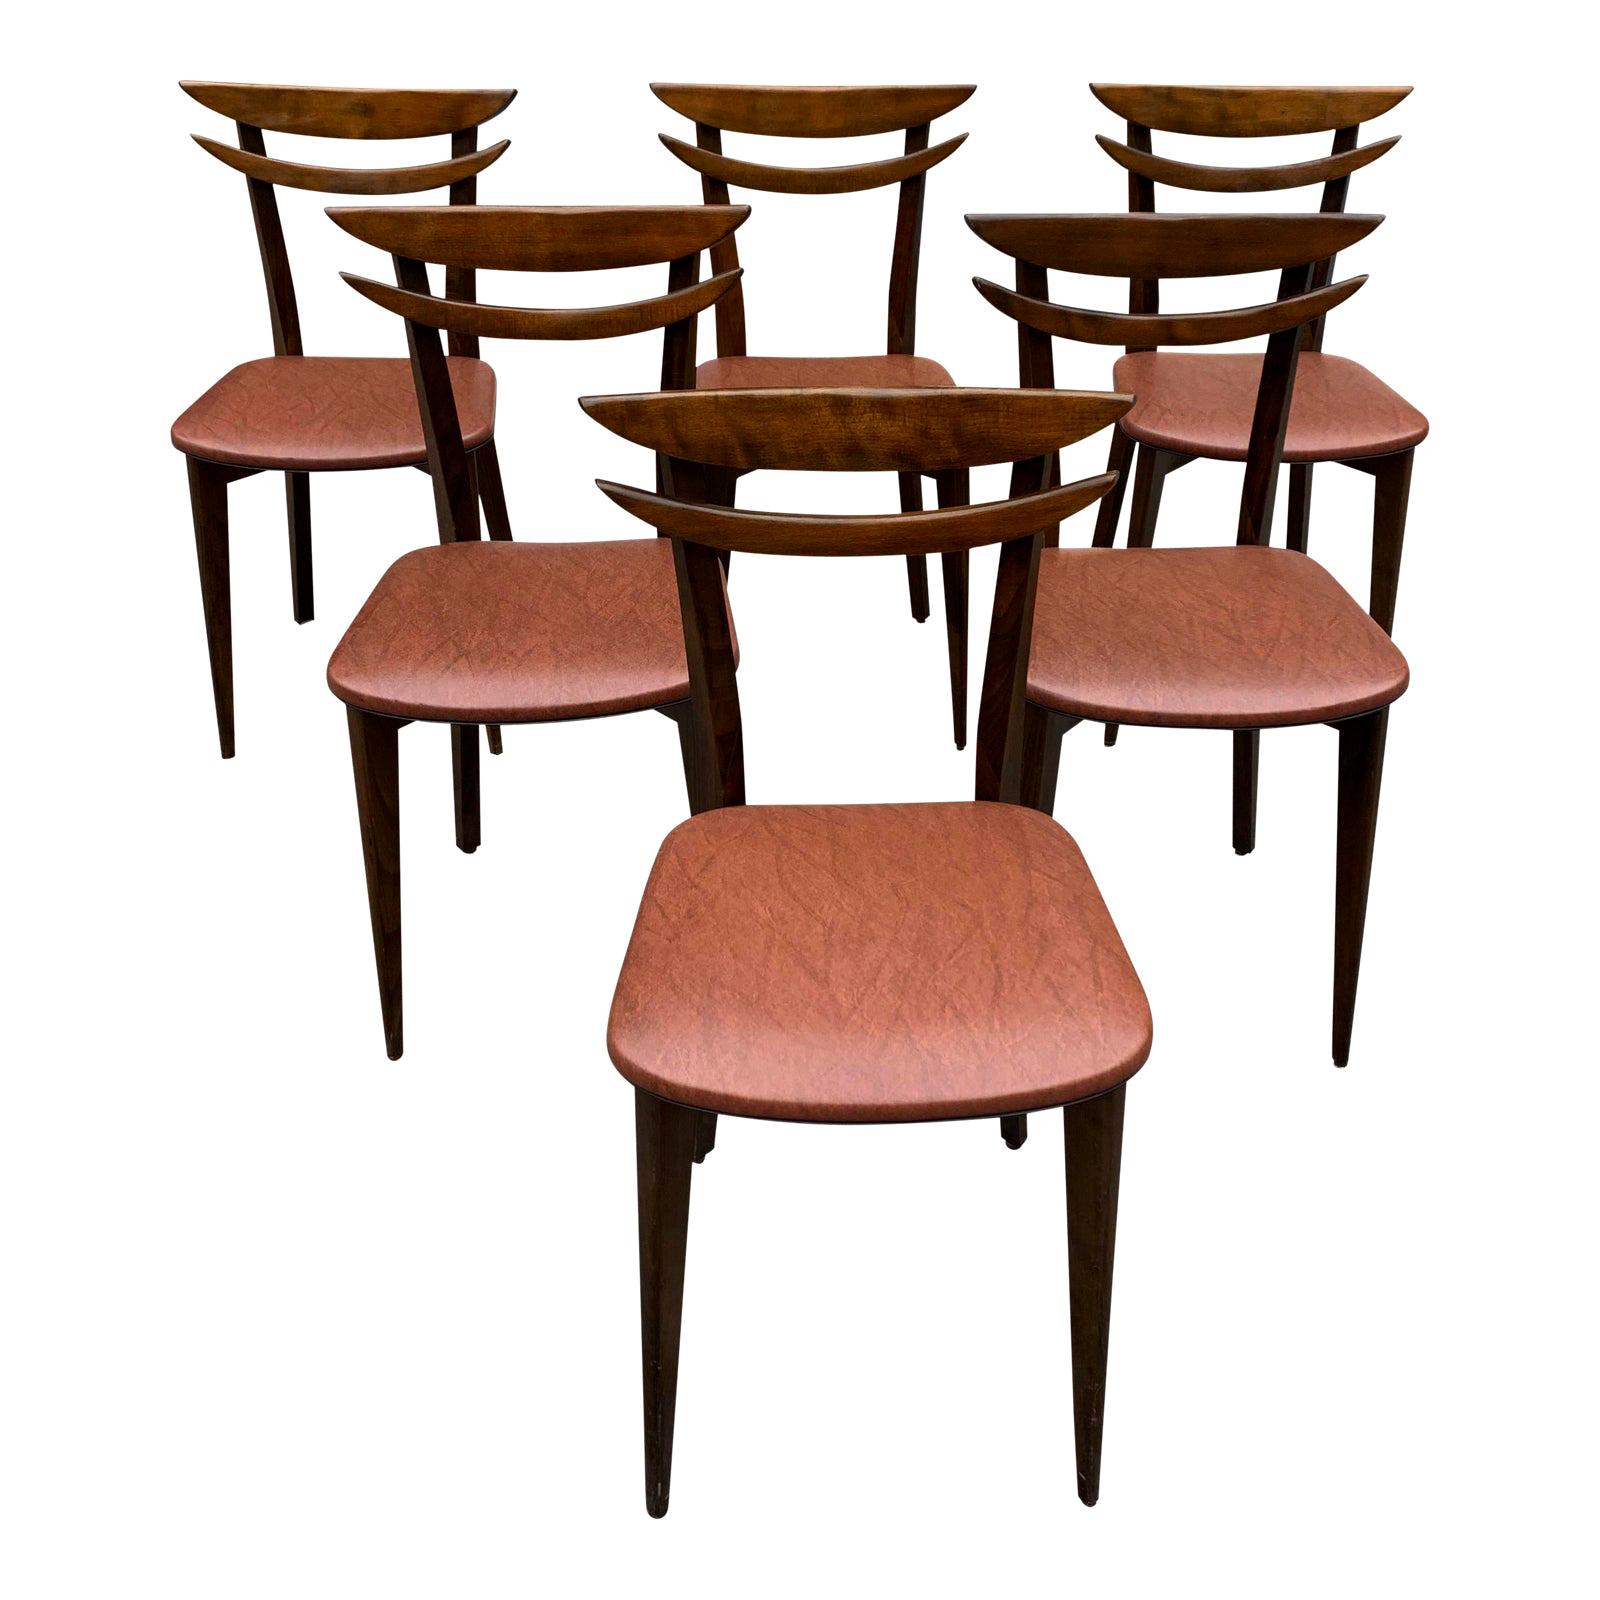 Set of 6 French Vintage Mid-Century Modern Solid Mahogany Dining Chairs, 1950s For Sale